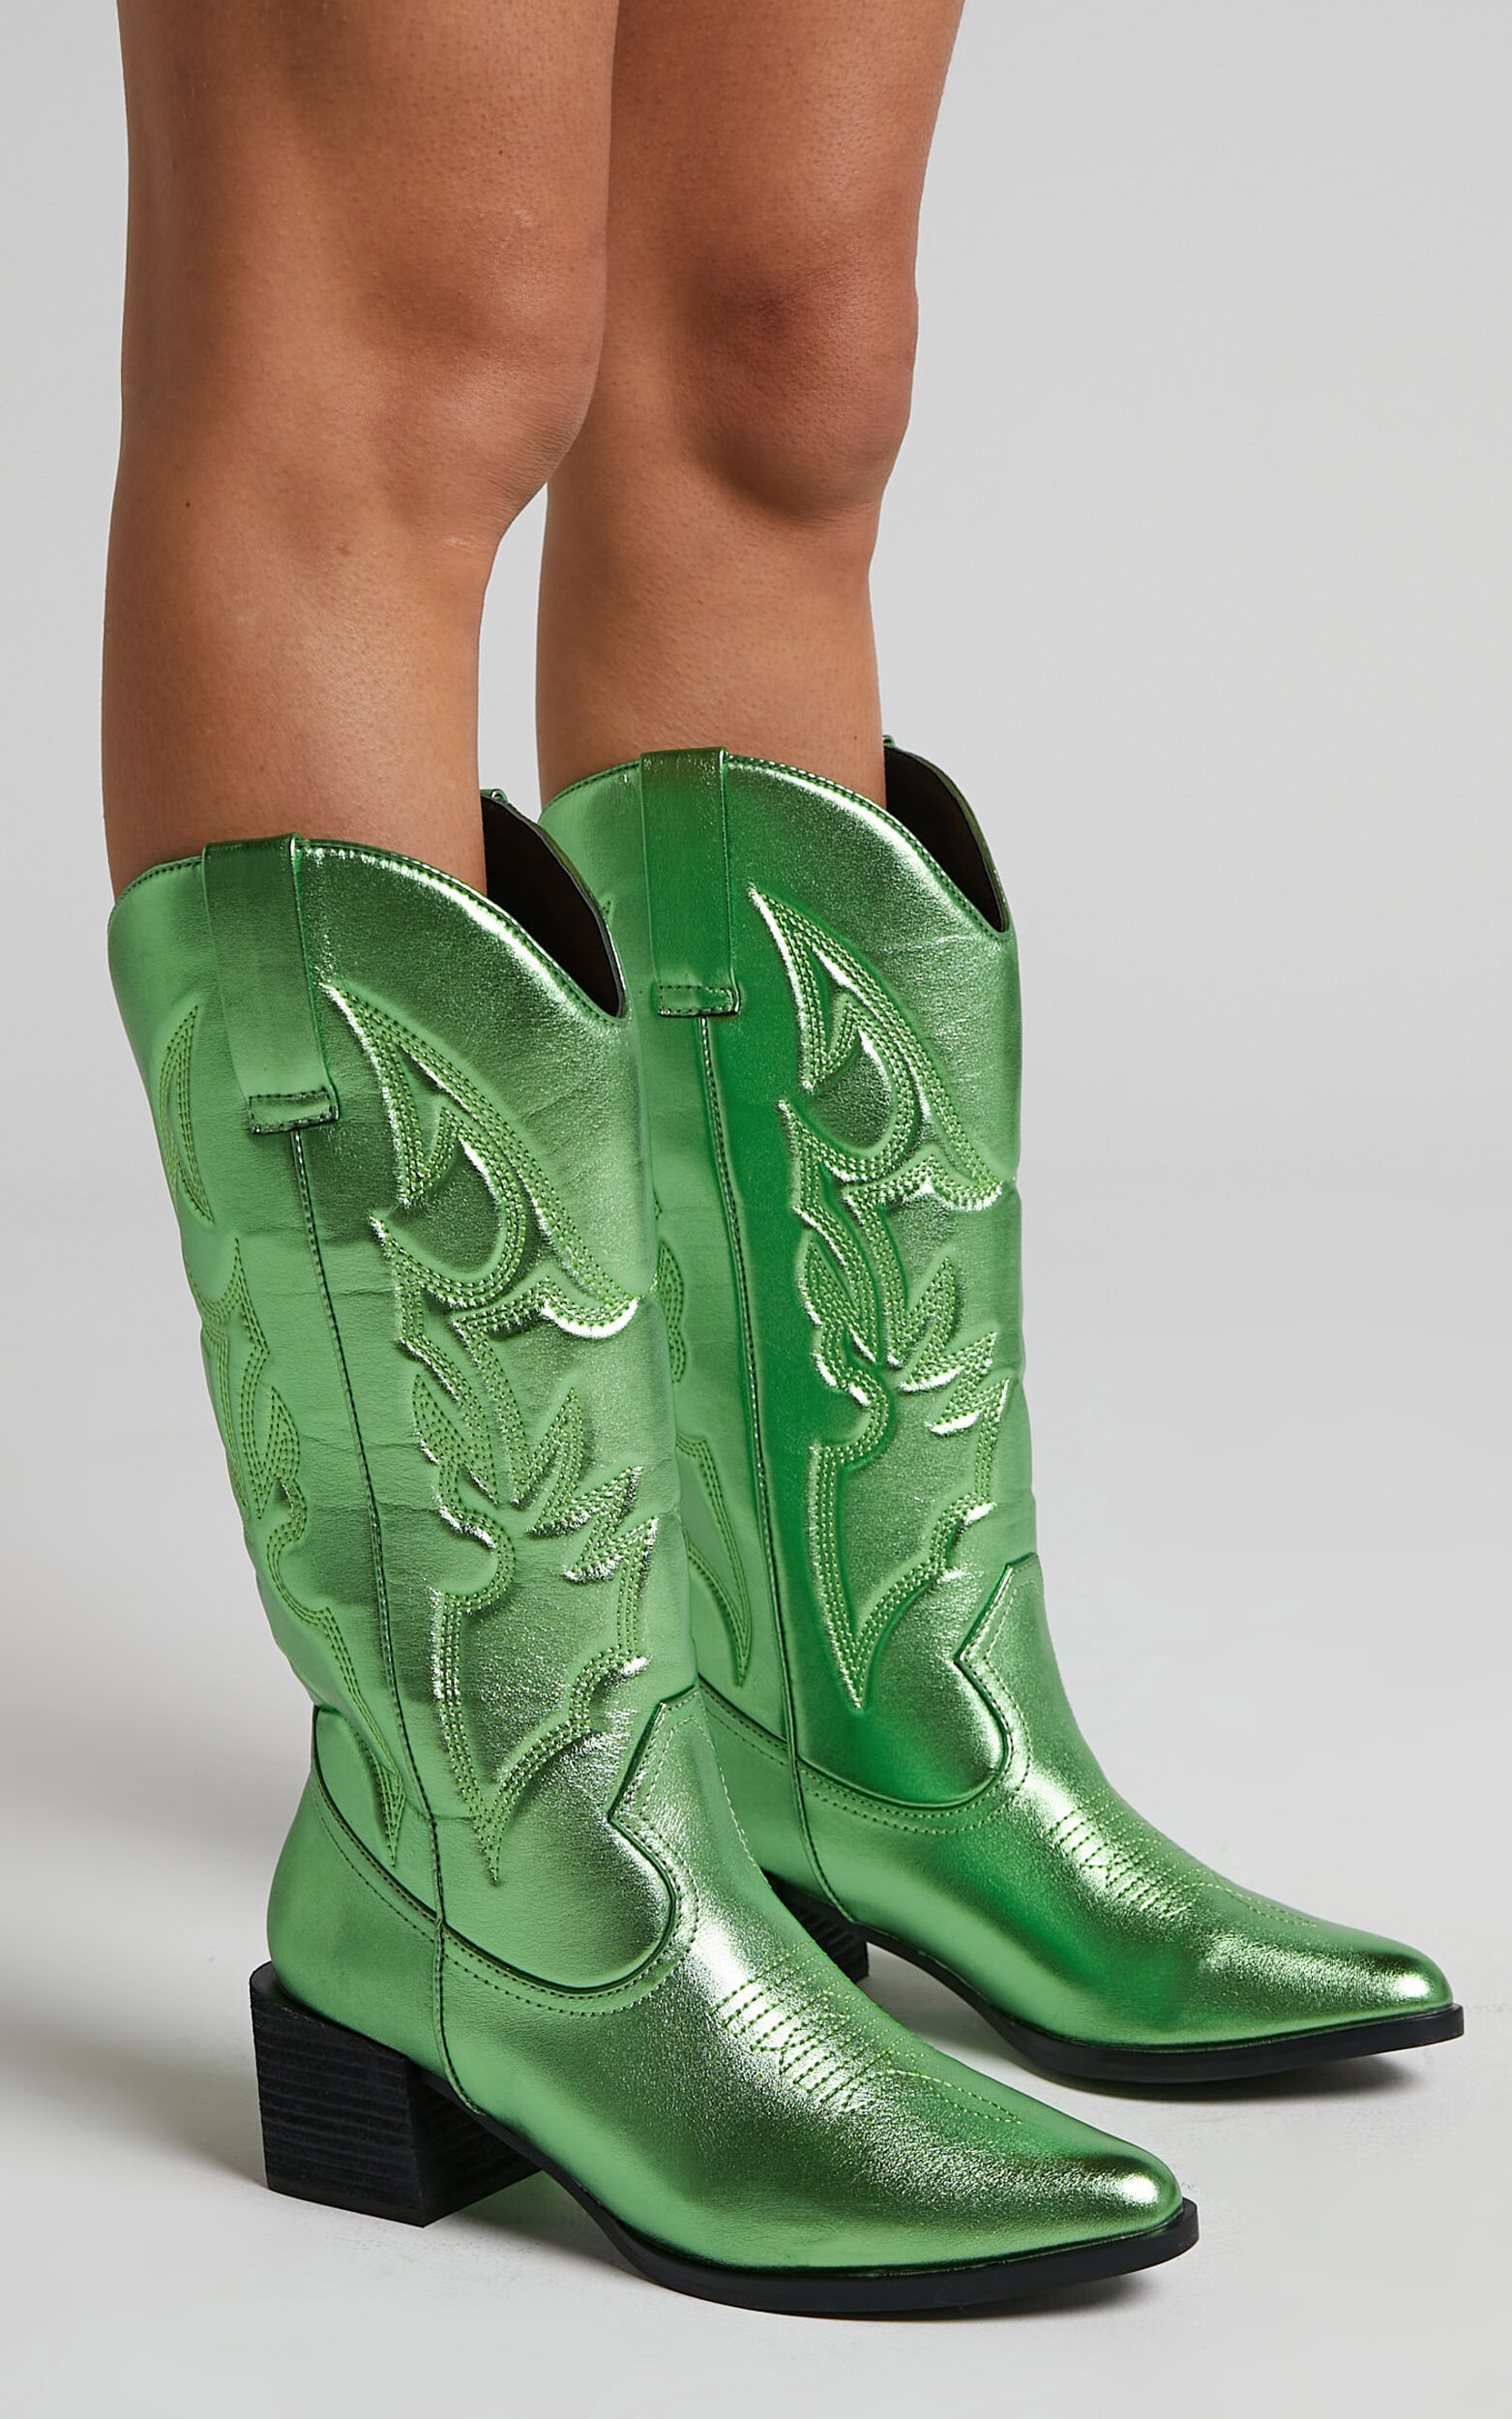 Therapy - Ranger Boots in Lime Metallic - 06, GRN1